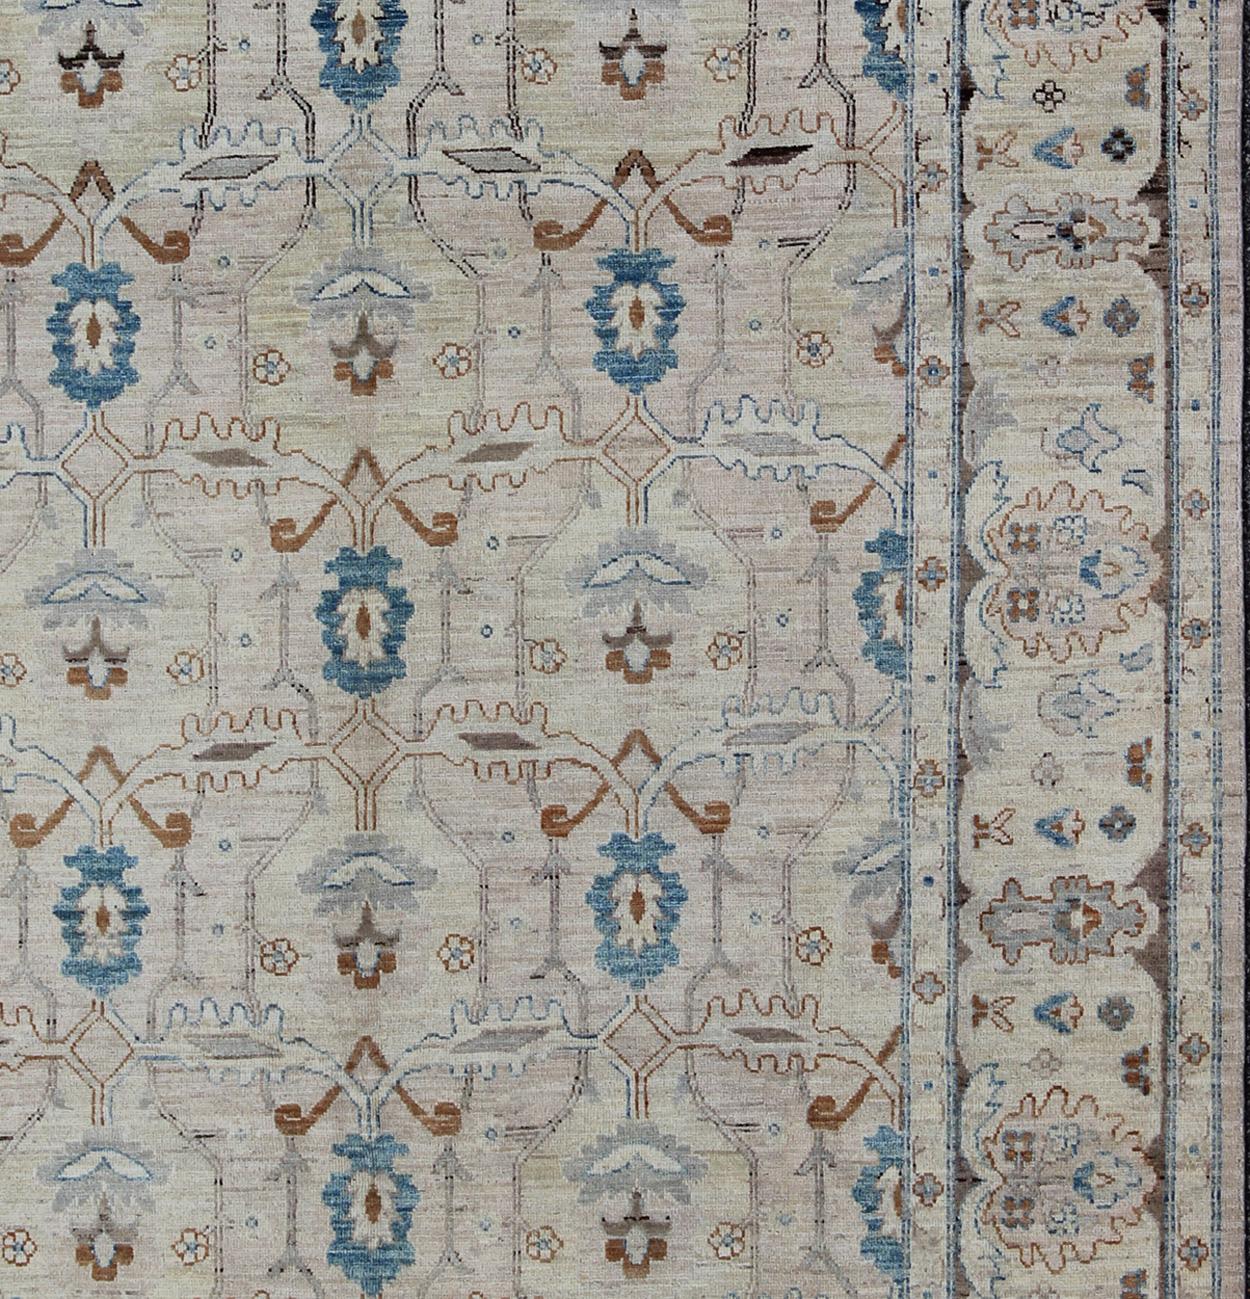 Measures: 8'10 x 12'1.
Light Color Khotan design rug with geometric motifs in Blush, Brown, Tan, and Blue. Khotan Design Rug with All-Over Geometric Pattern by Keivan Woven Arts / rug MP-1703-7565 country of origin / type: Afghanistan / Khotan

This